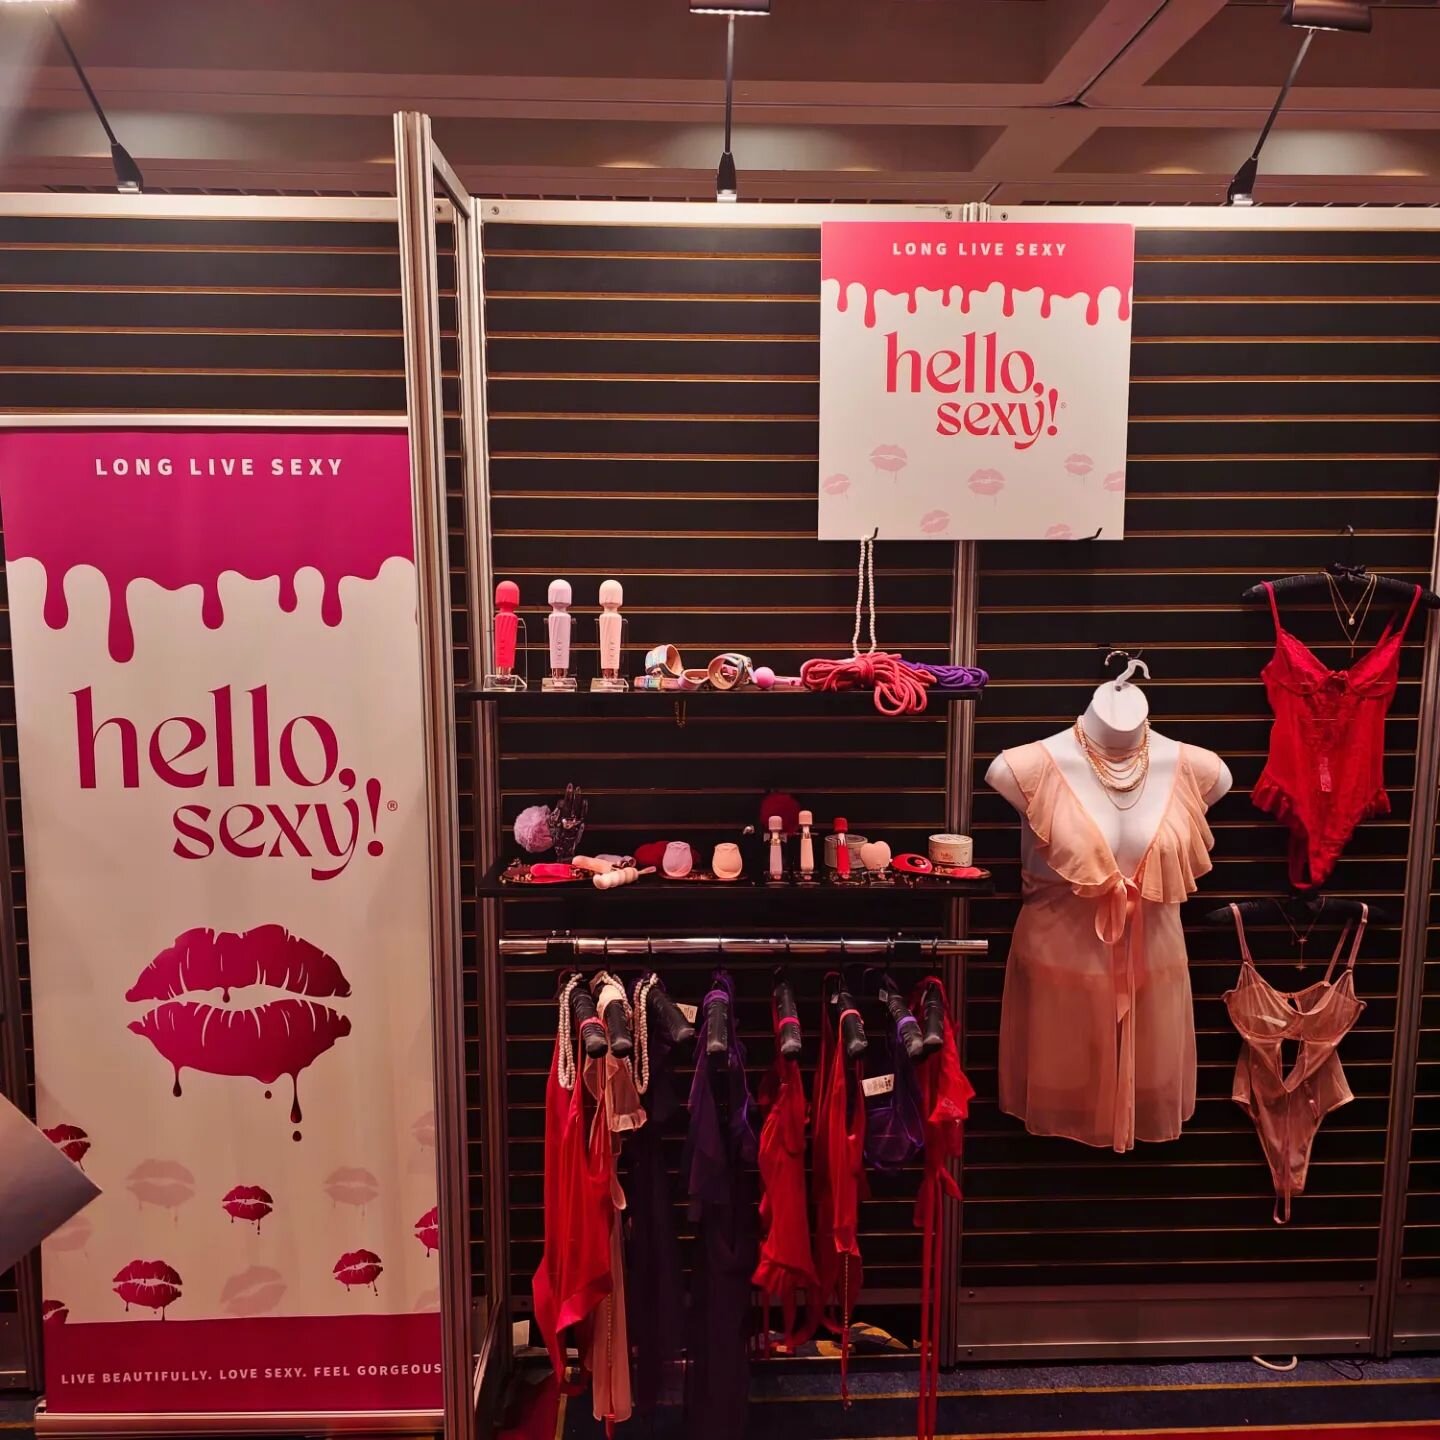 Coming soon, &quot;Hello, Sexy!&quot; by @thankmenowbrands ! Here's a quick look at our sites at the @altitudeshow . More closeups and reveals to come!

📷: @thecoybox

#altitudeshow #comingsoon #reveal #newreleases #springcollection #healthandbeauty